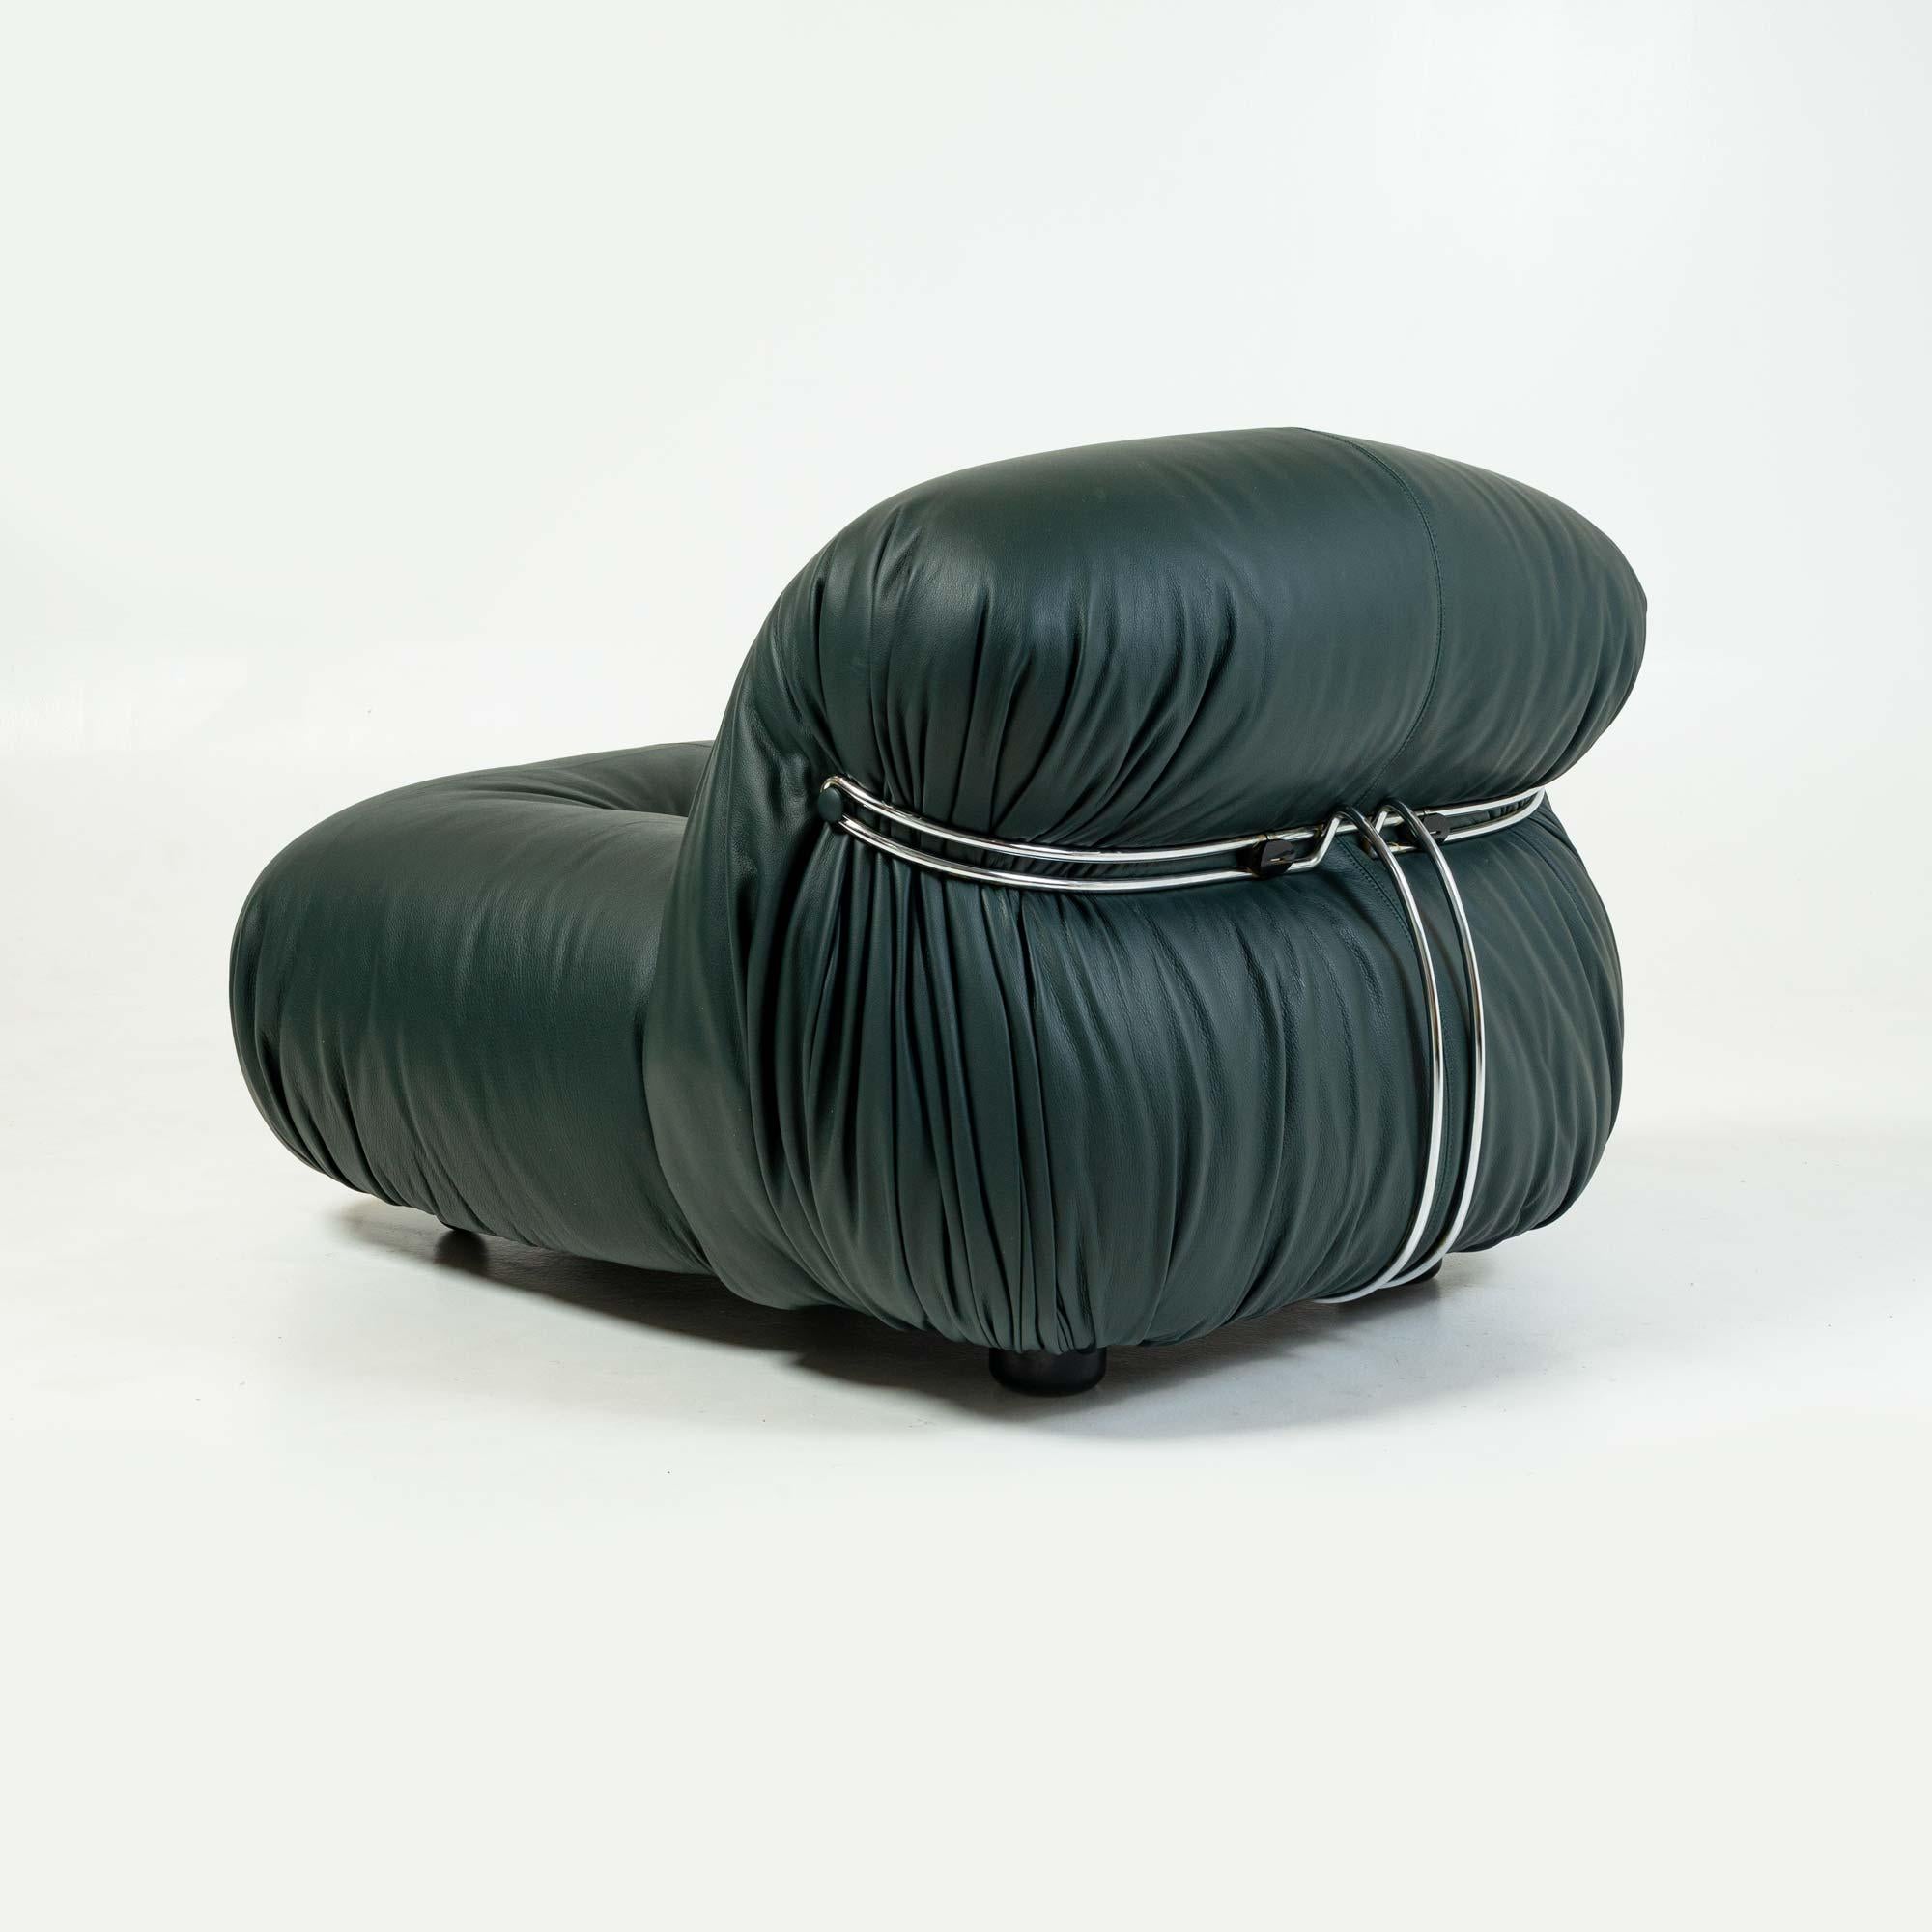 Late 20th Century Soriana Lounge Chair by Afra & Tobia Scarpa for Cassina, Elmo Green Leather For Sale